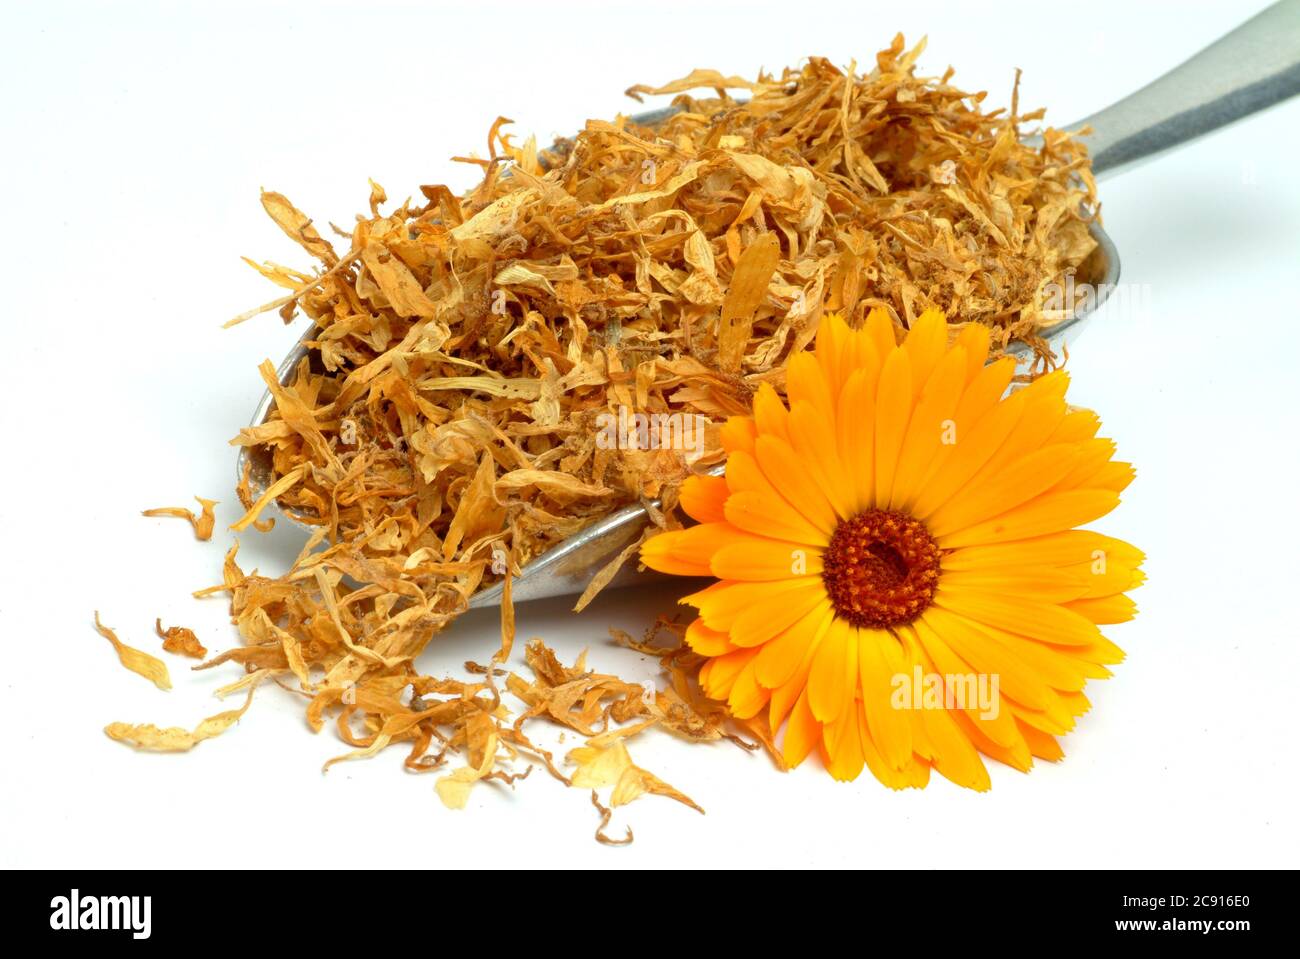 dried flowers of calendula, Calendula officinalis. Pharmaceutically the dried flower heads are used. The pharmaceutical drug reduces inflammation and Stock Photo